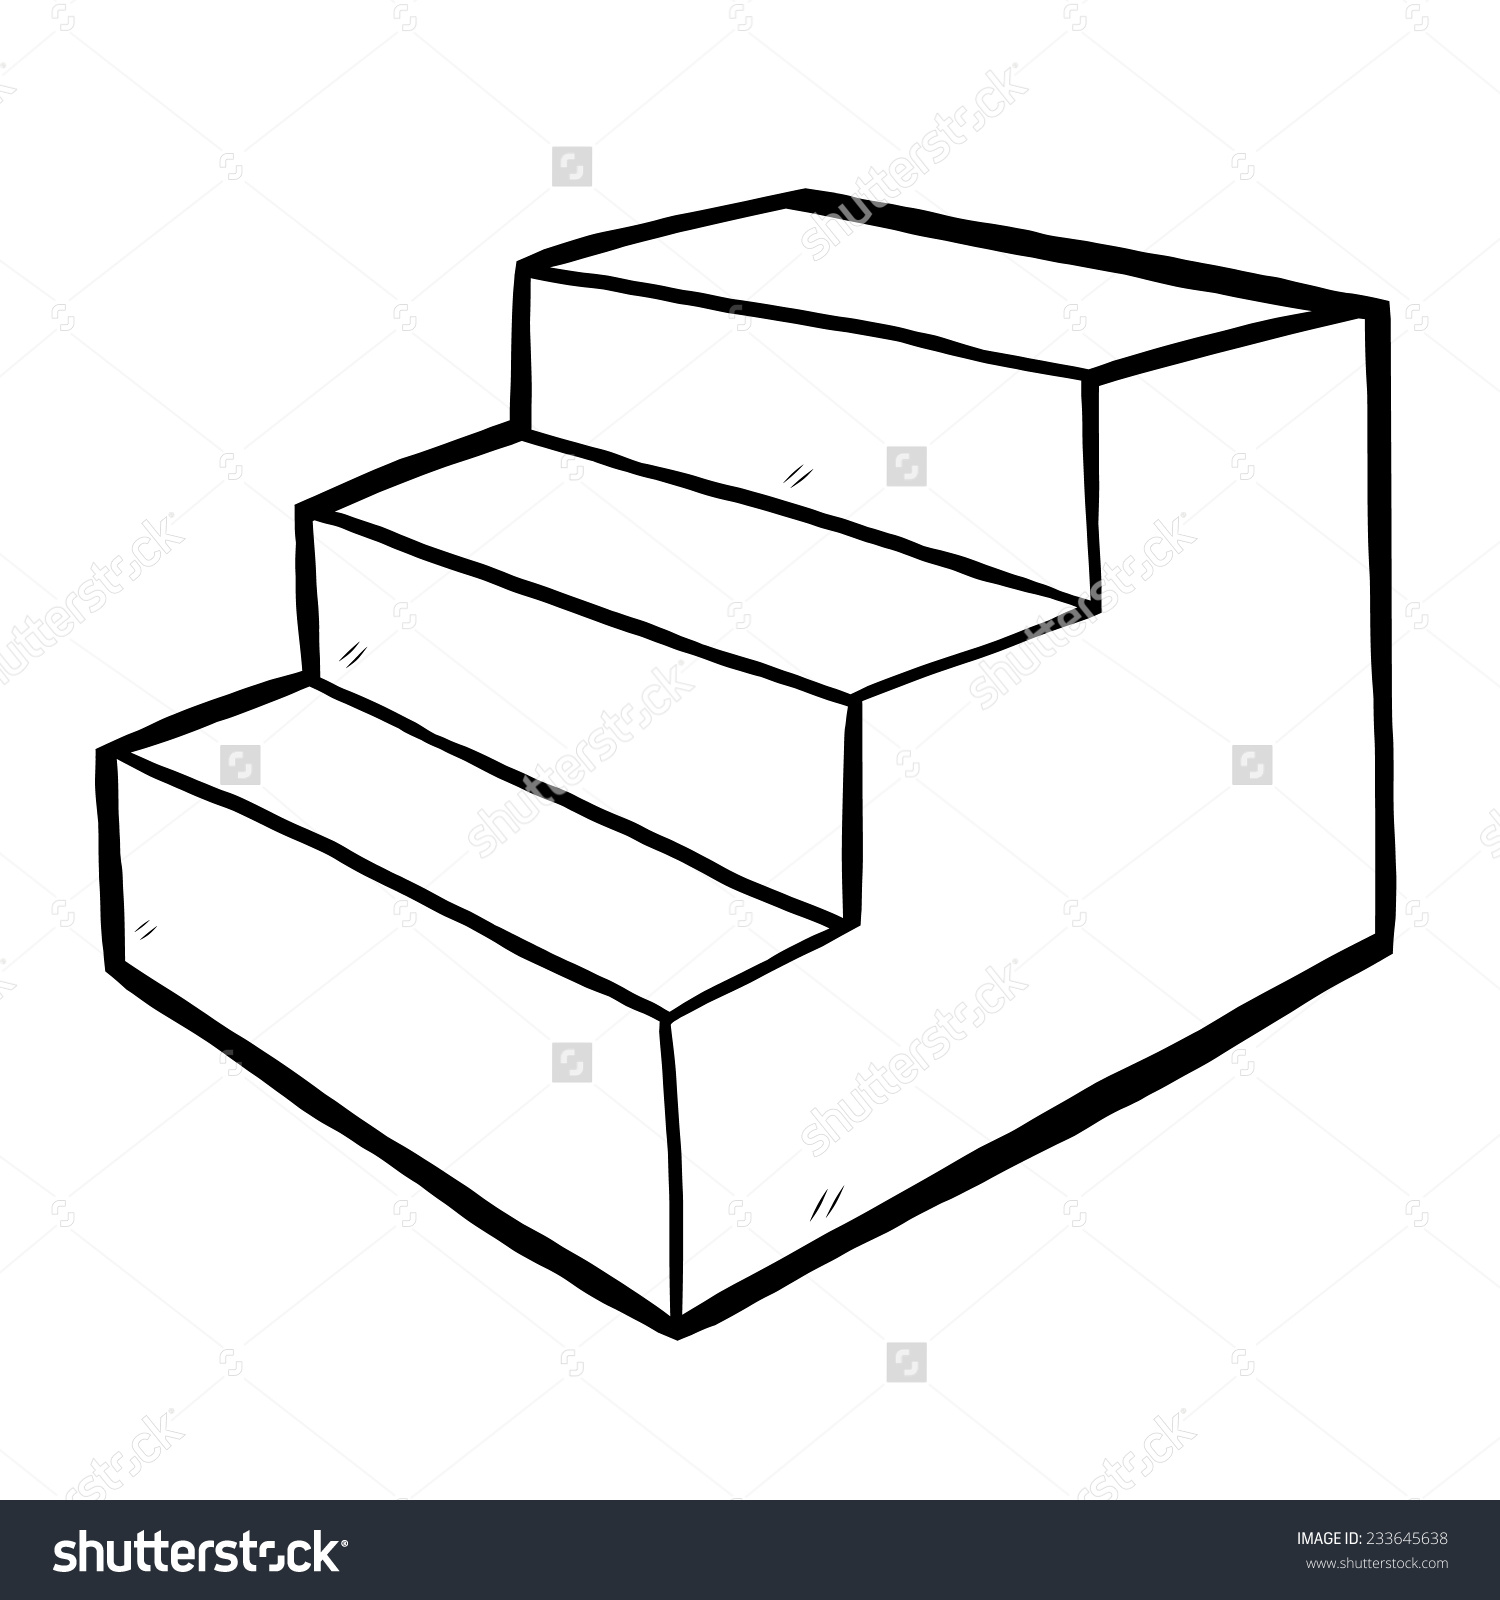 staircase clipart 3 step